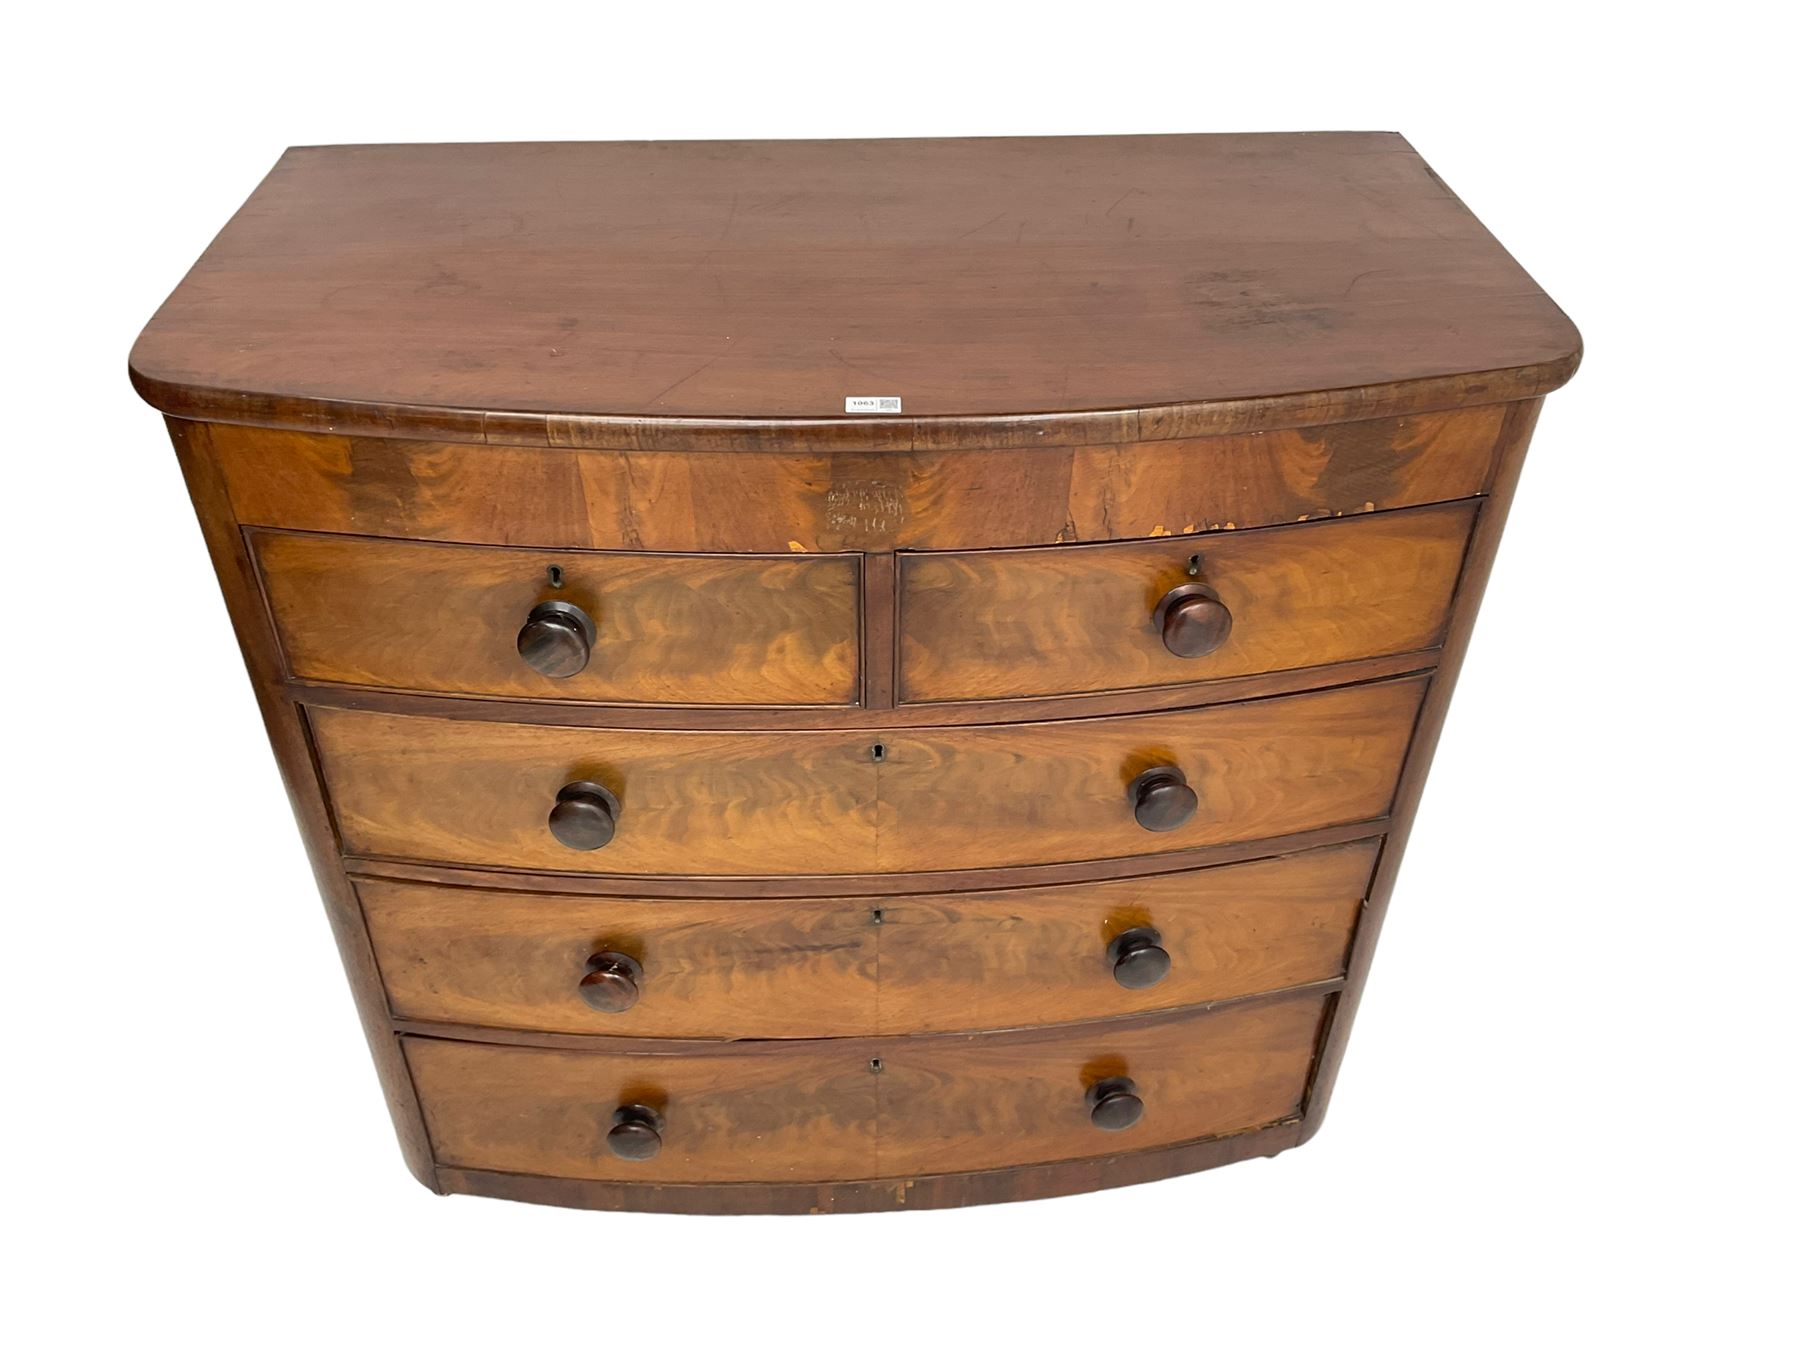 Late 19th century mahogany bow front chest - Image 7 of 7